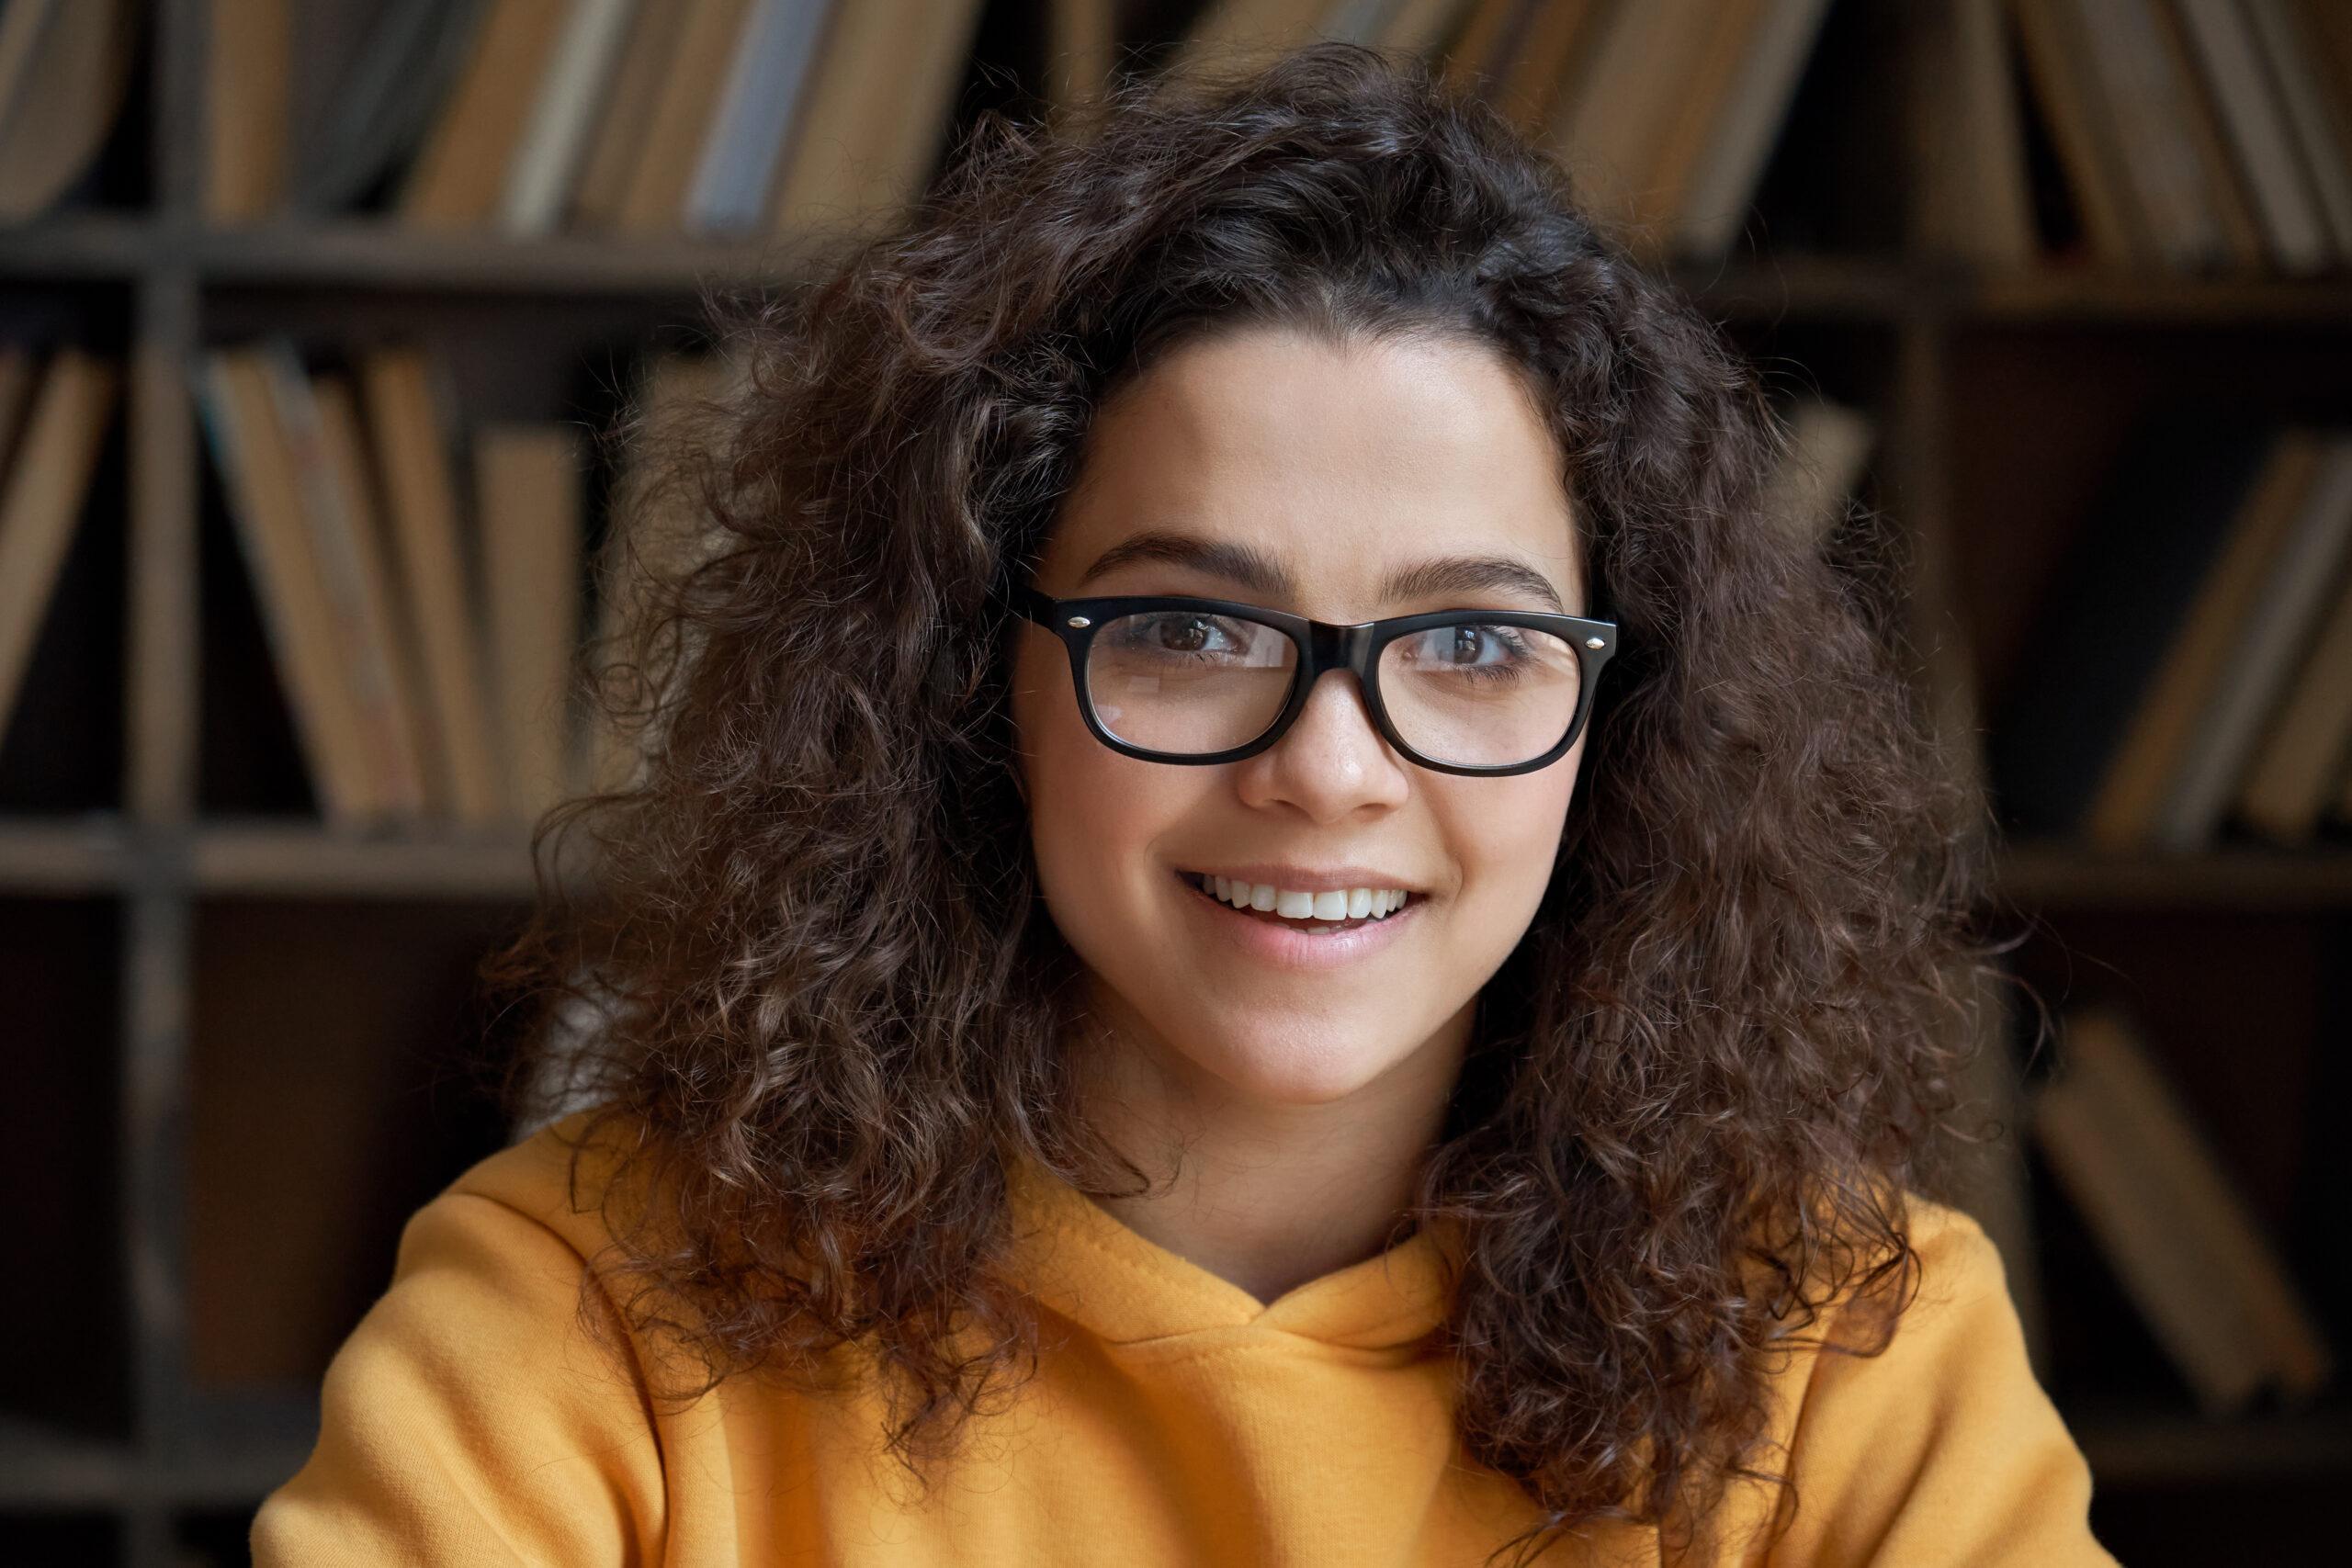 Young girl with glasses and long curly hair smiling in a library 